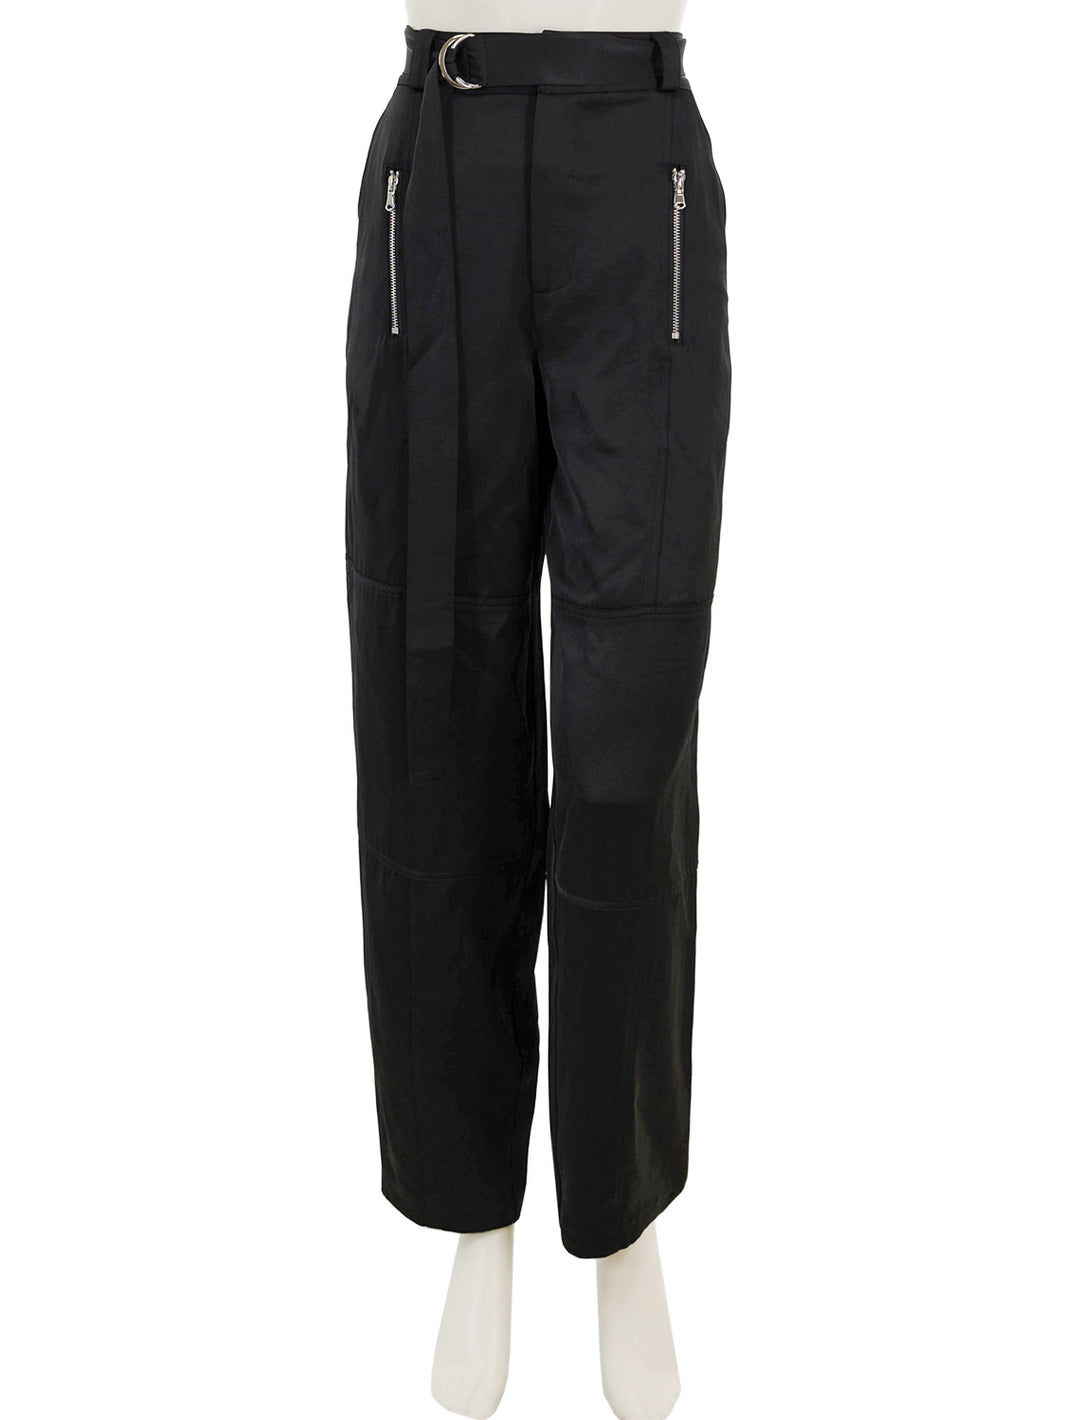 Front view of Saint Art's courtney mid-rise charmeuse pant in black.